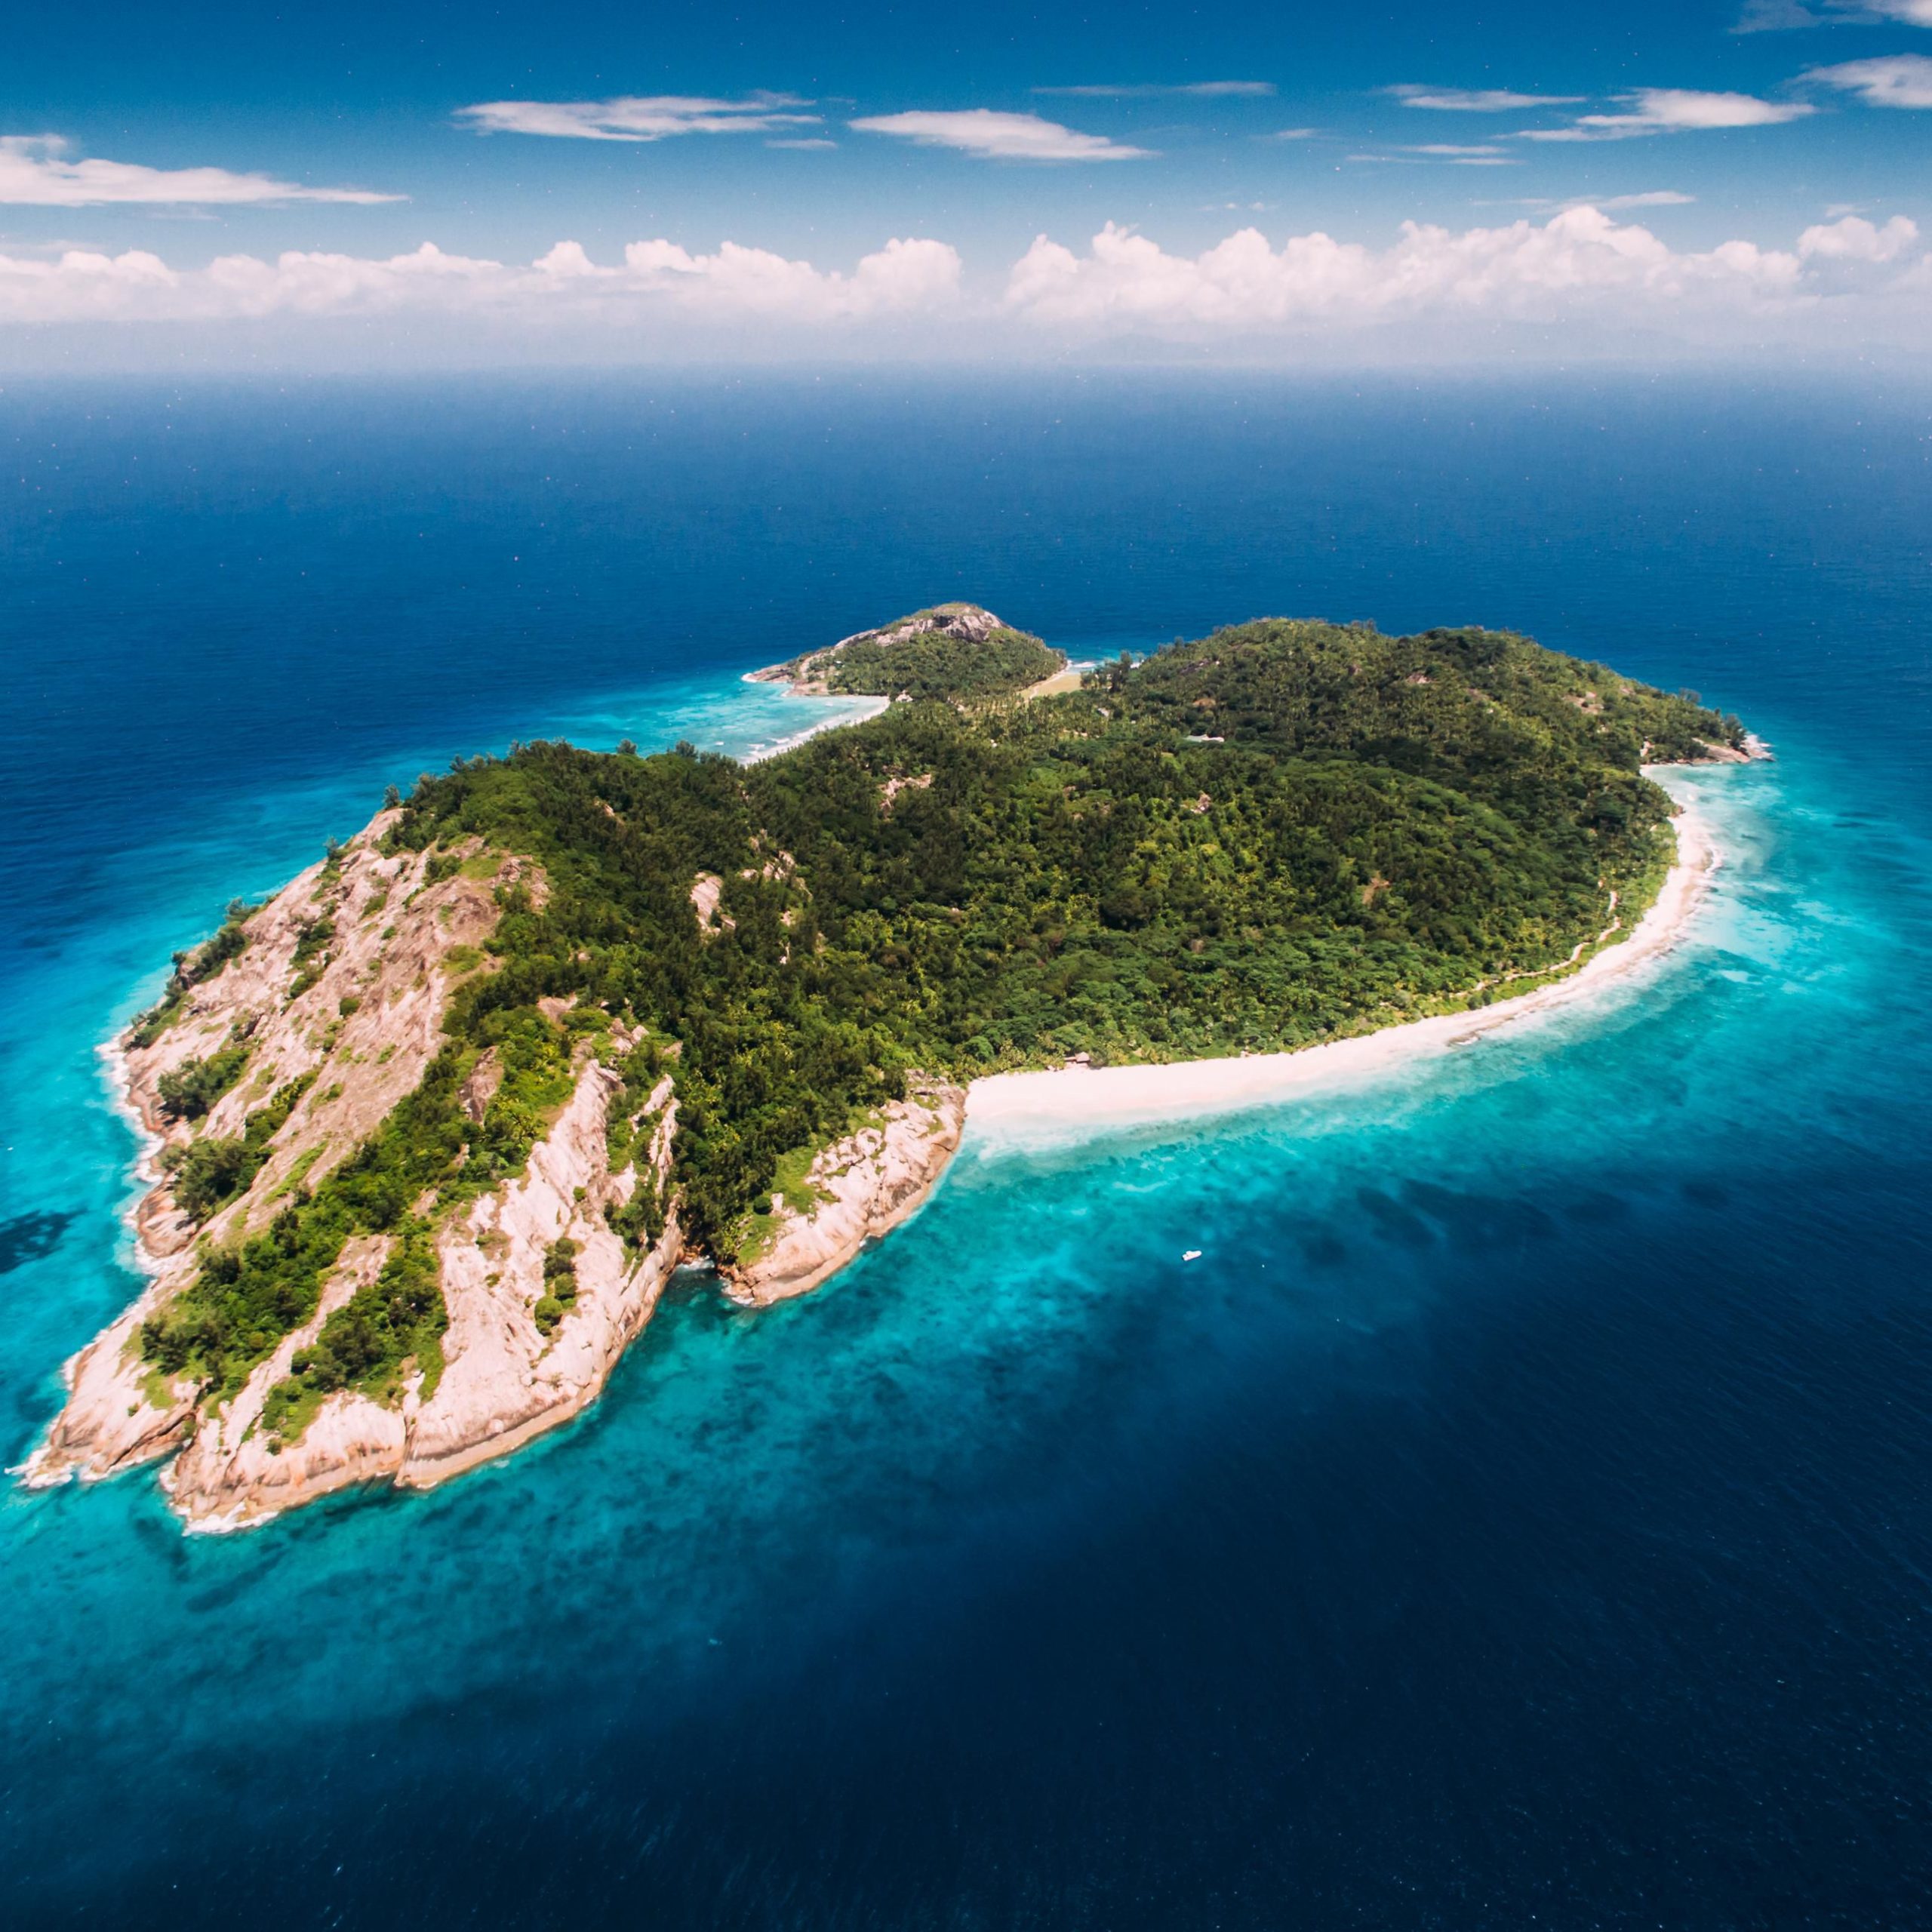 Owning a Private Island: Is it a Dream Come True or Too Much Hassle